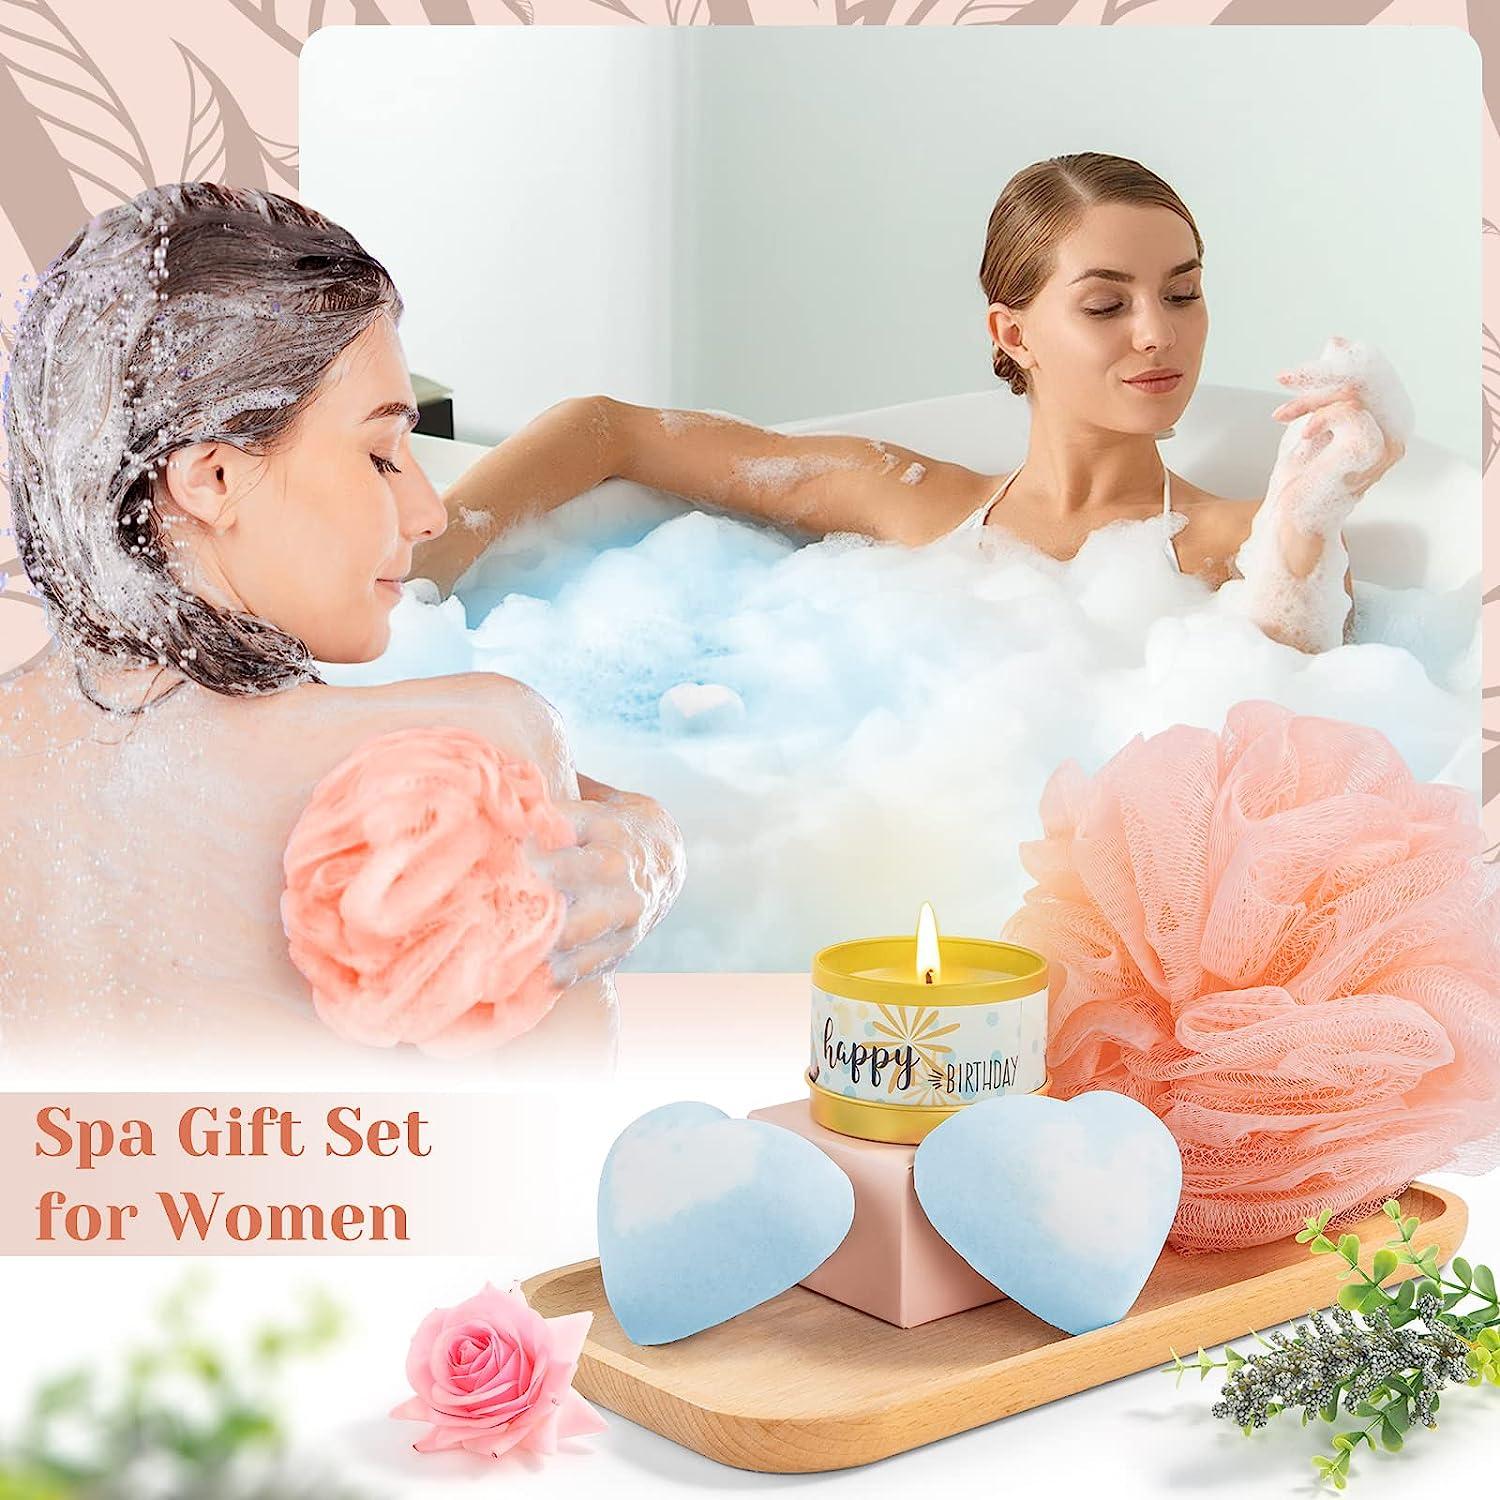 Birthday Gifts for Women,Happy Birthday Bath Set Relaxing Spa Gift